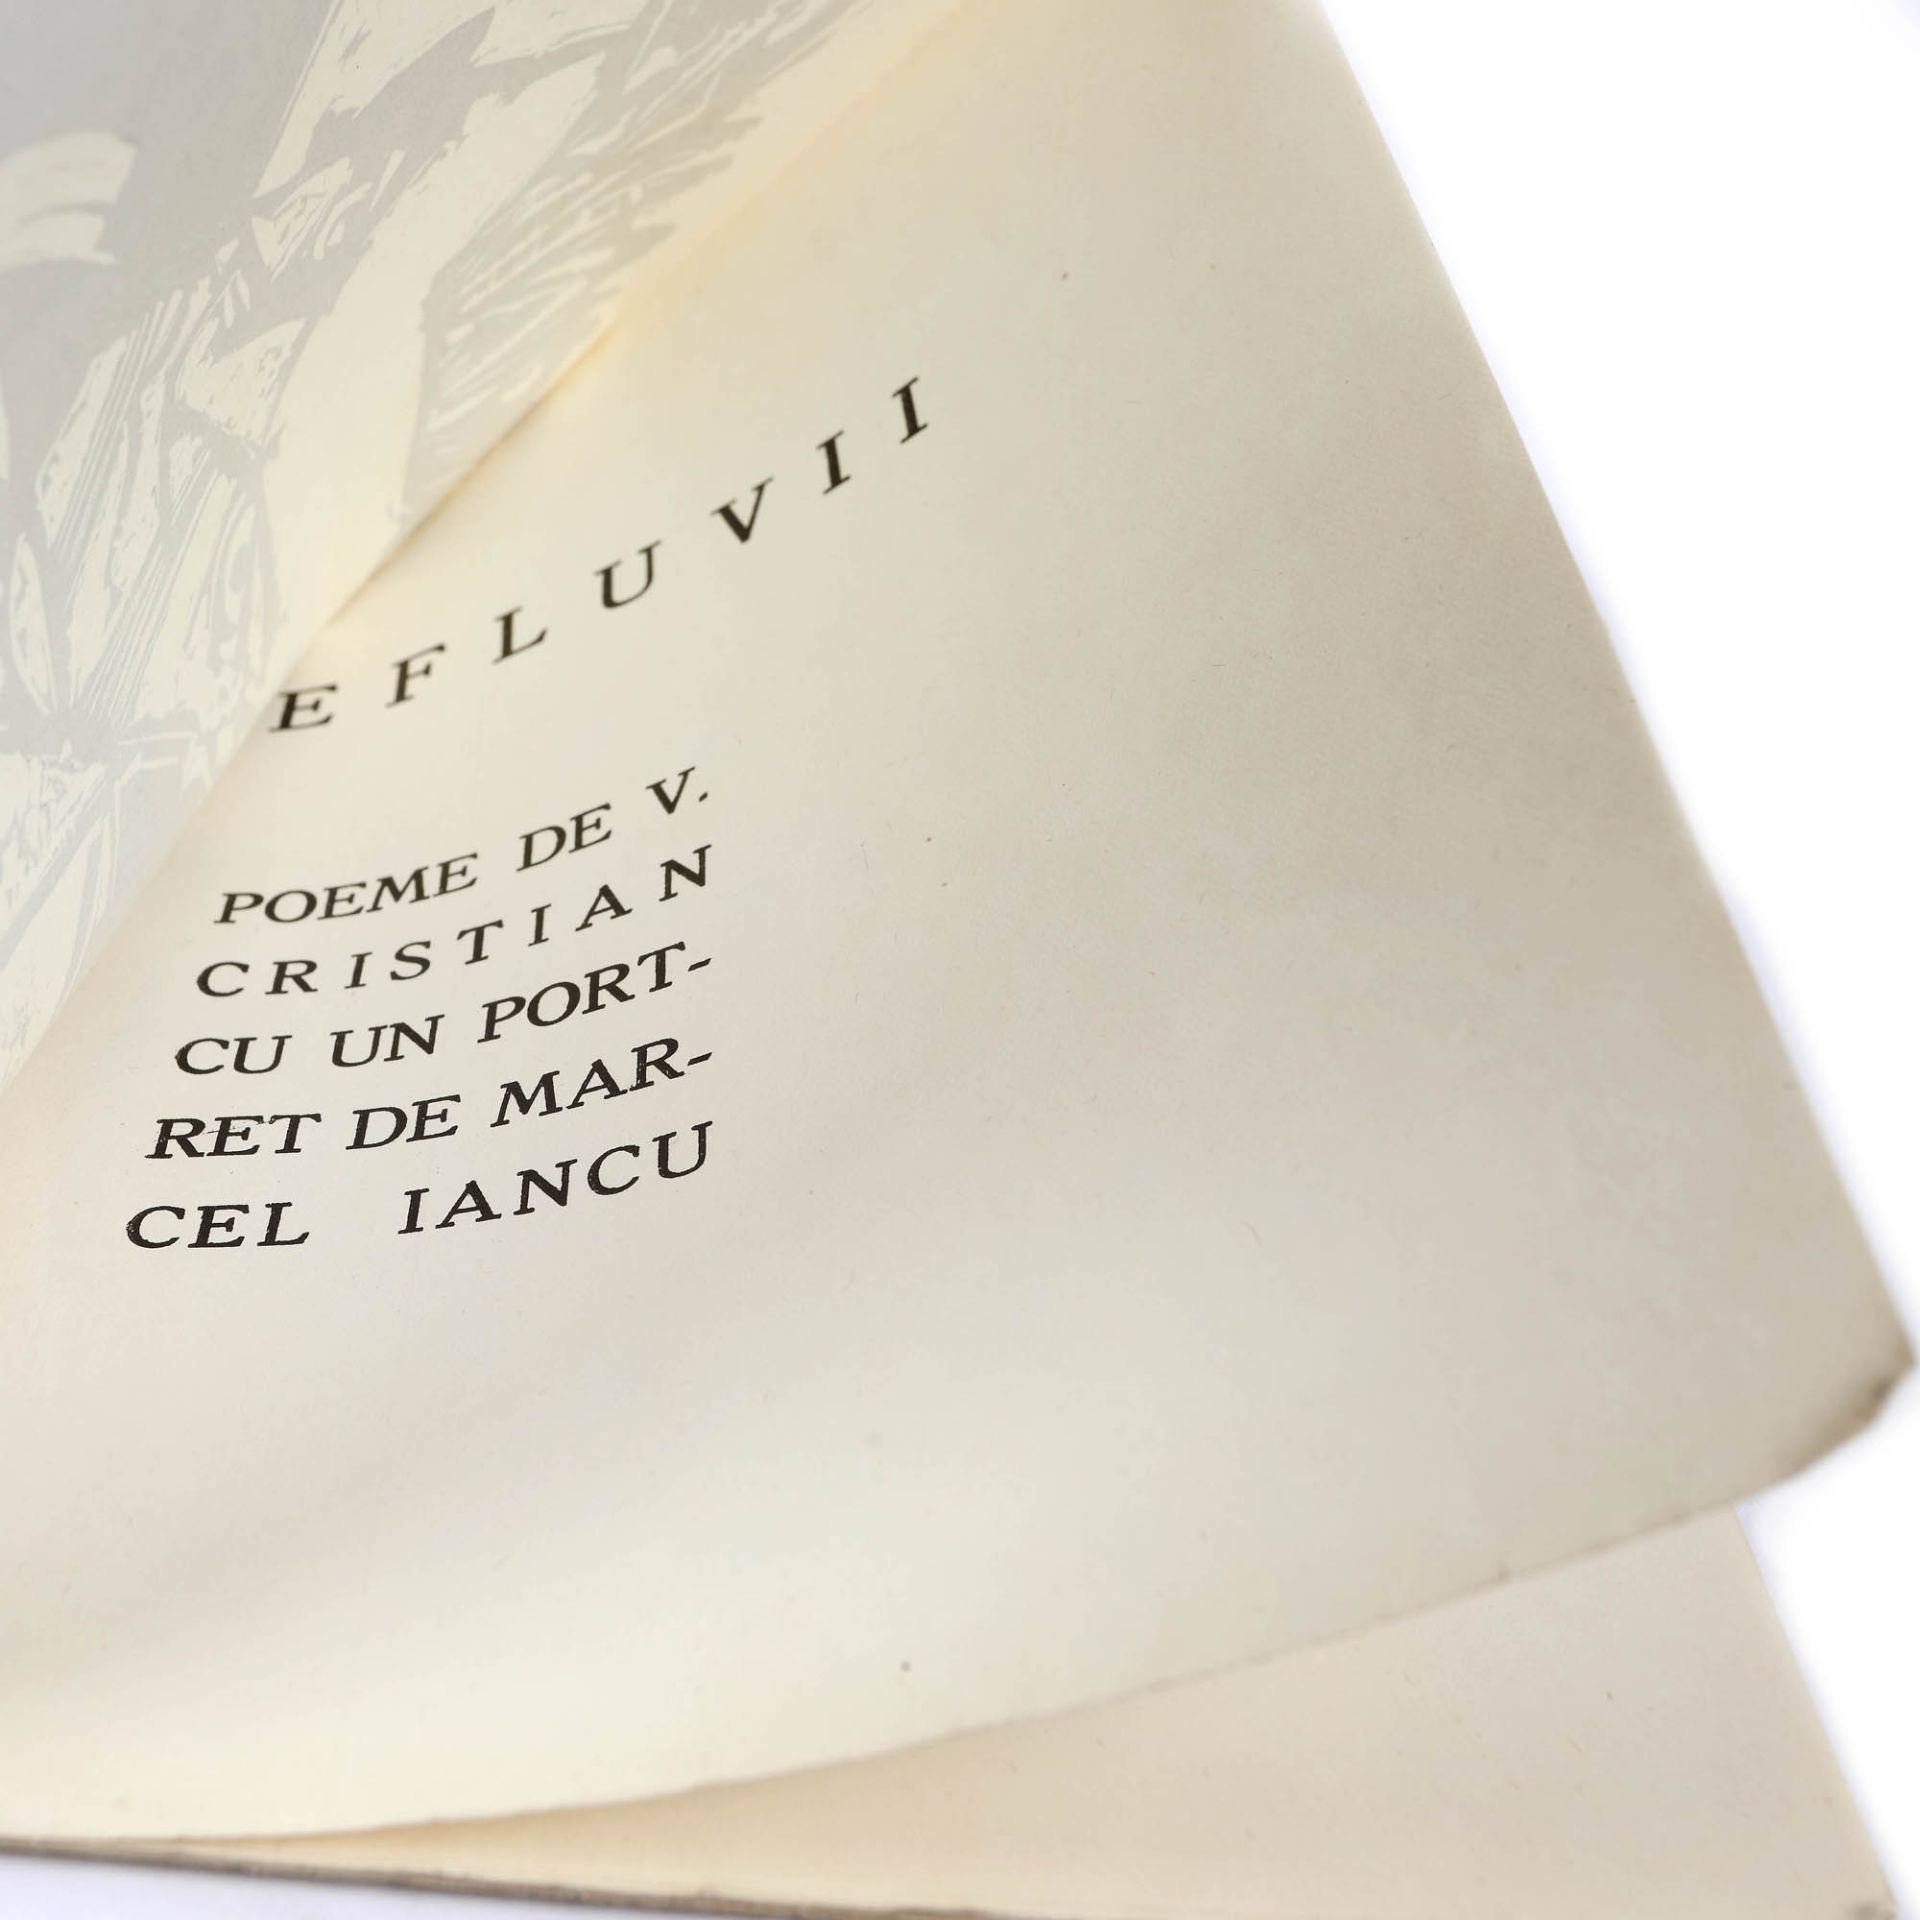 "Efluvii" ("Effluvia"), by V. Cristian, Bucharest, with a drawing by Marcel Iancu and the author's d - Image 3 of 4